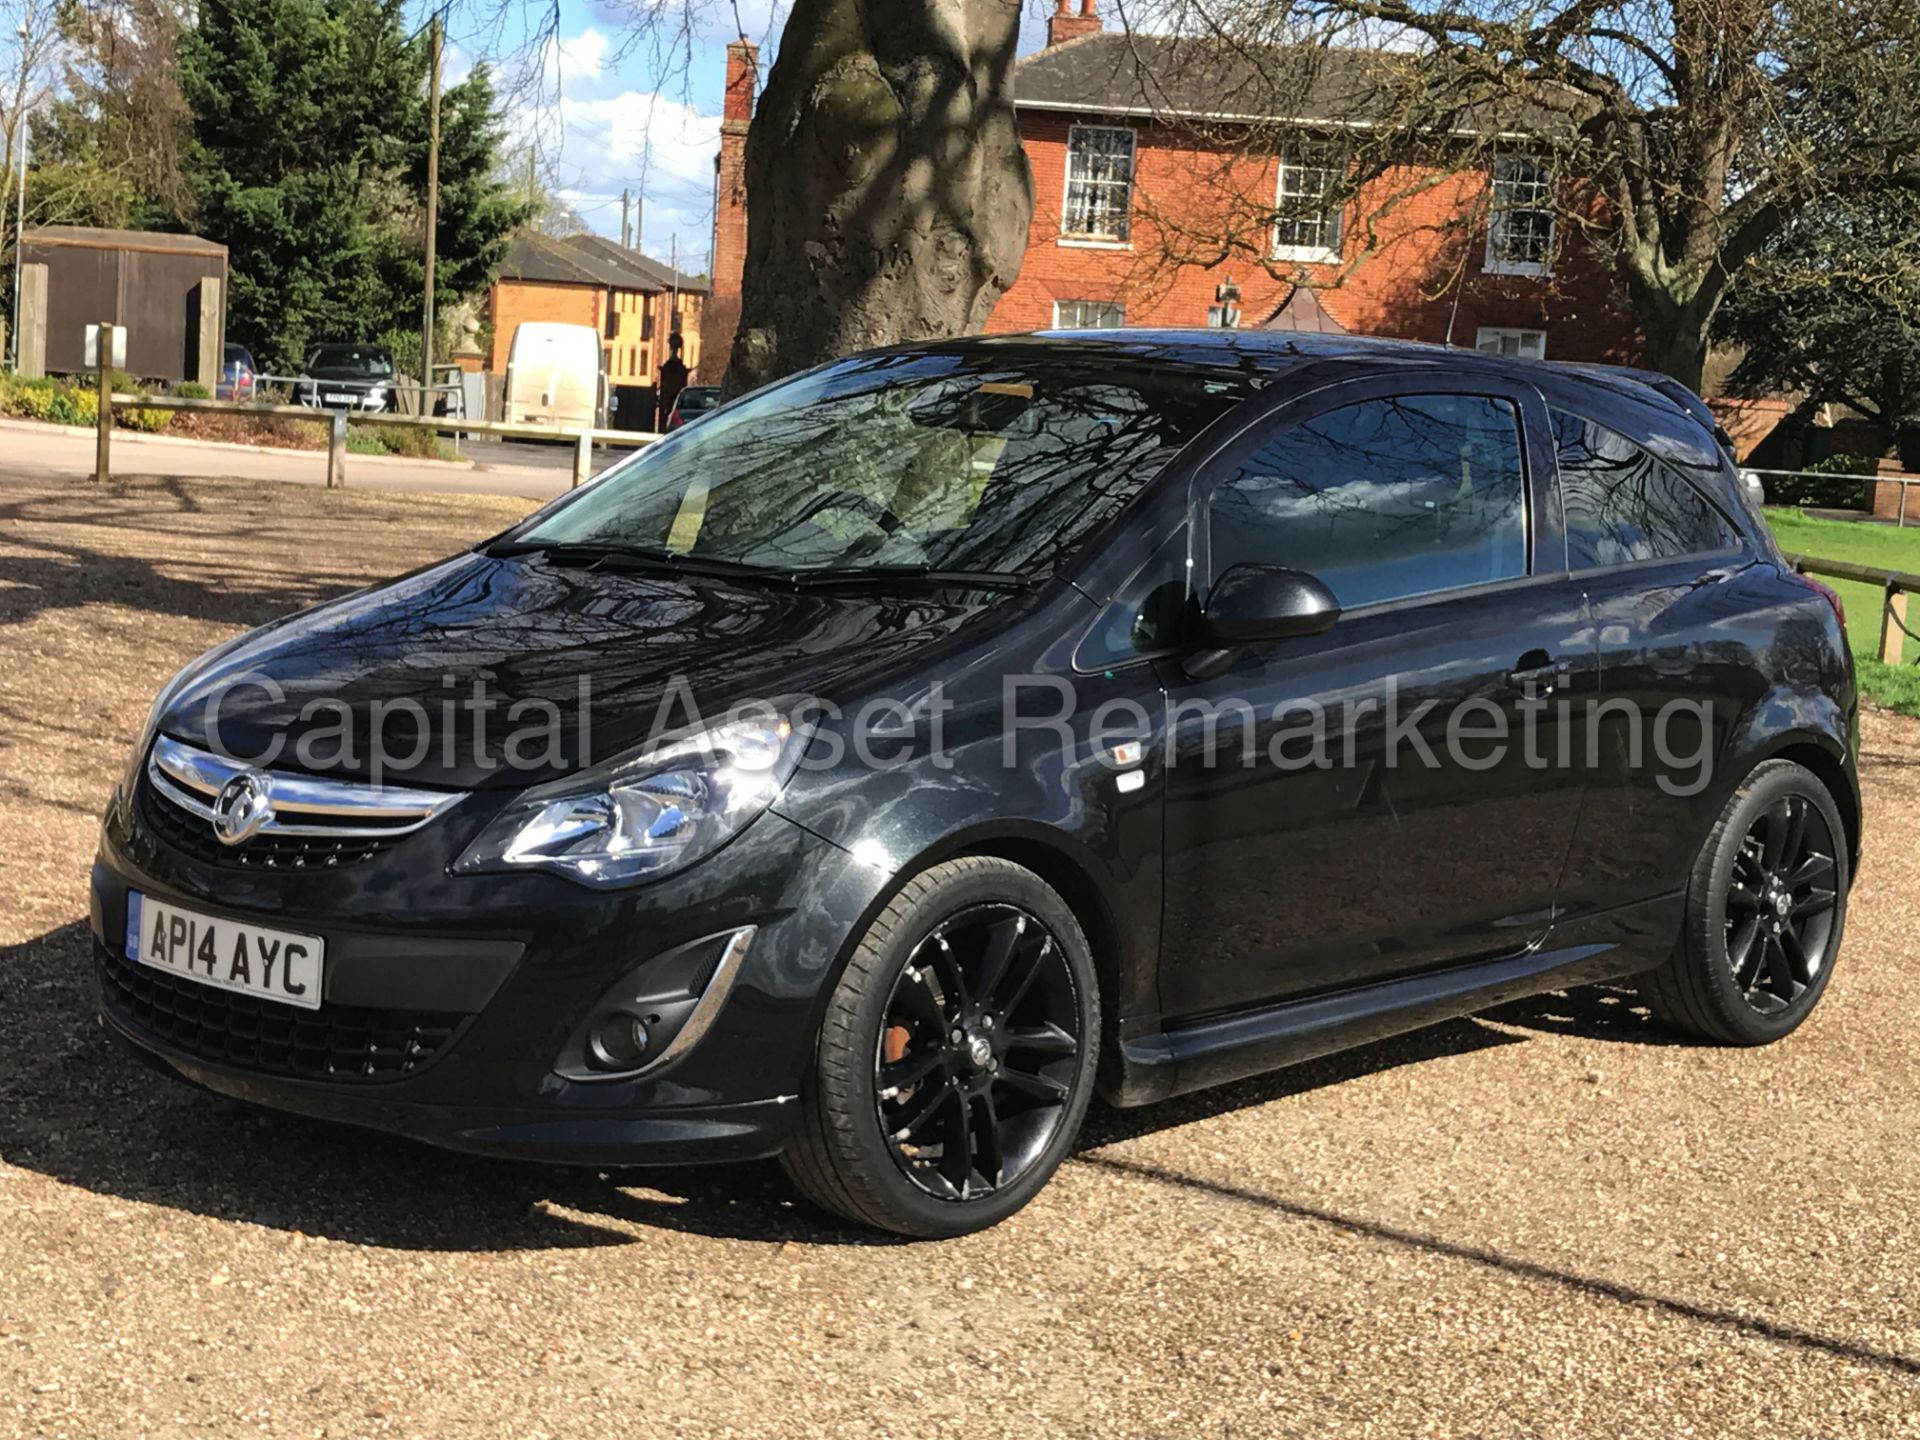 ON SALE VAUXHALL CORSA 'LIMITED EDITION' (2014) 'CDTI - 5 SPEED - AIR CON - ELEC PACK' (1 OWNER - Image 4 of 25